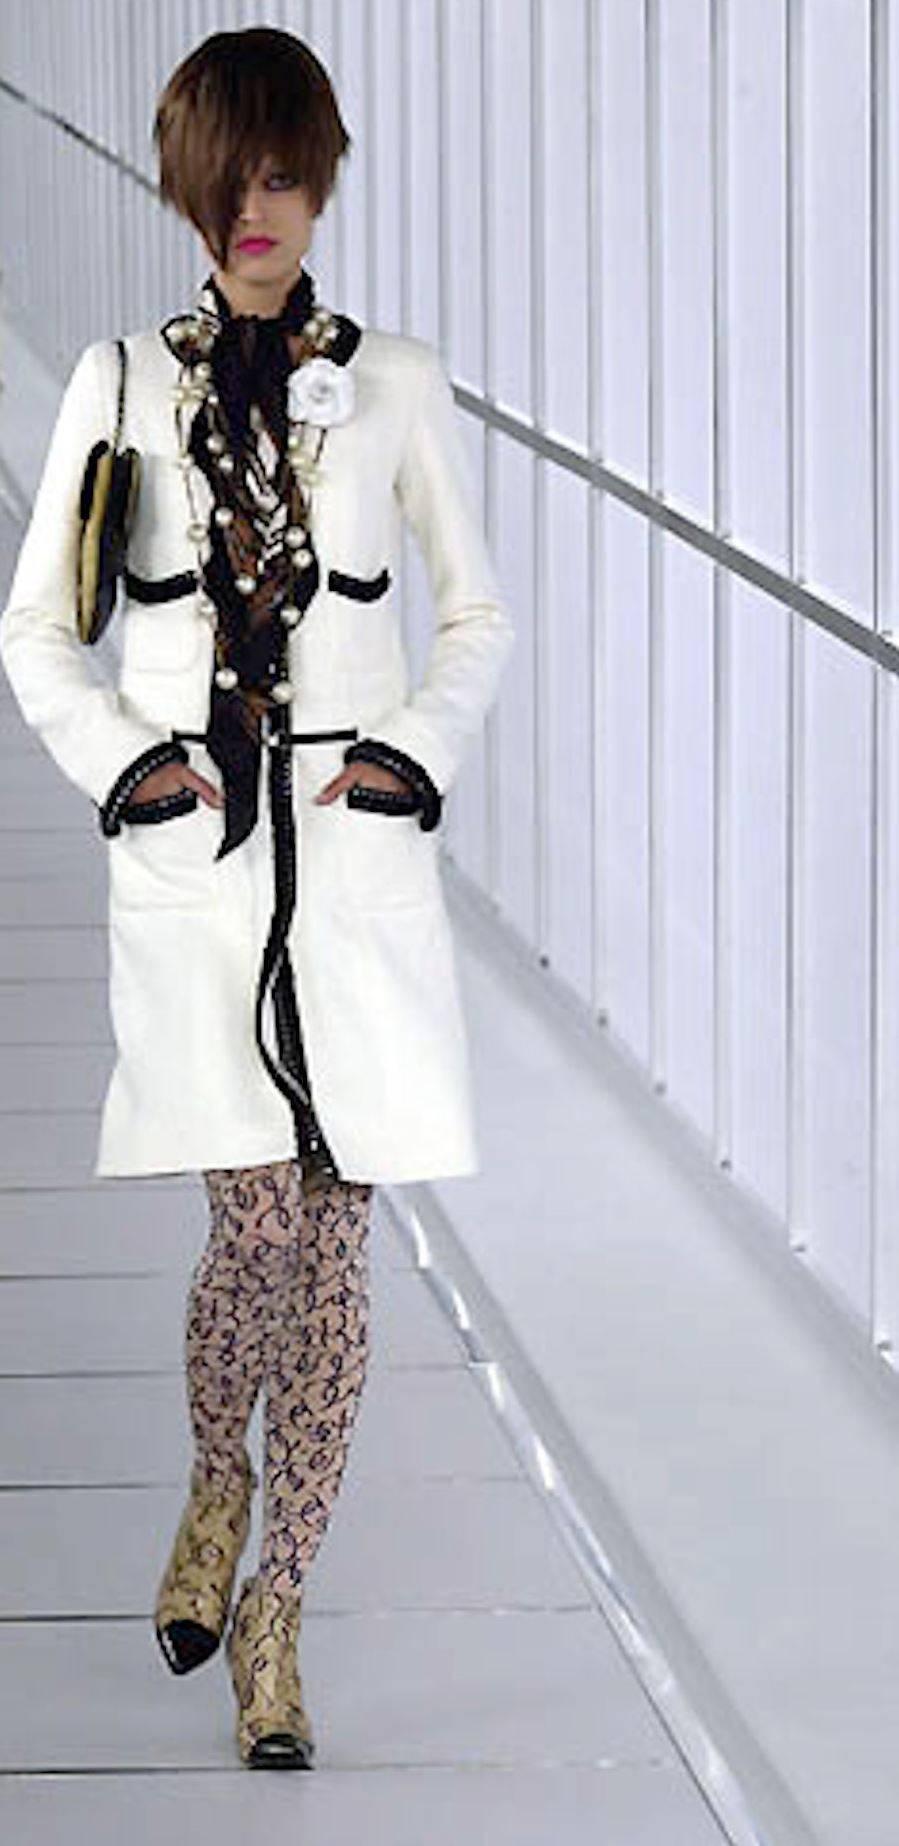 Women's Rare Collector's CHANEL Signature Tweed White and Black Coat with Belt